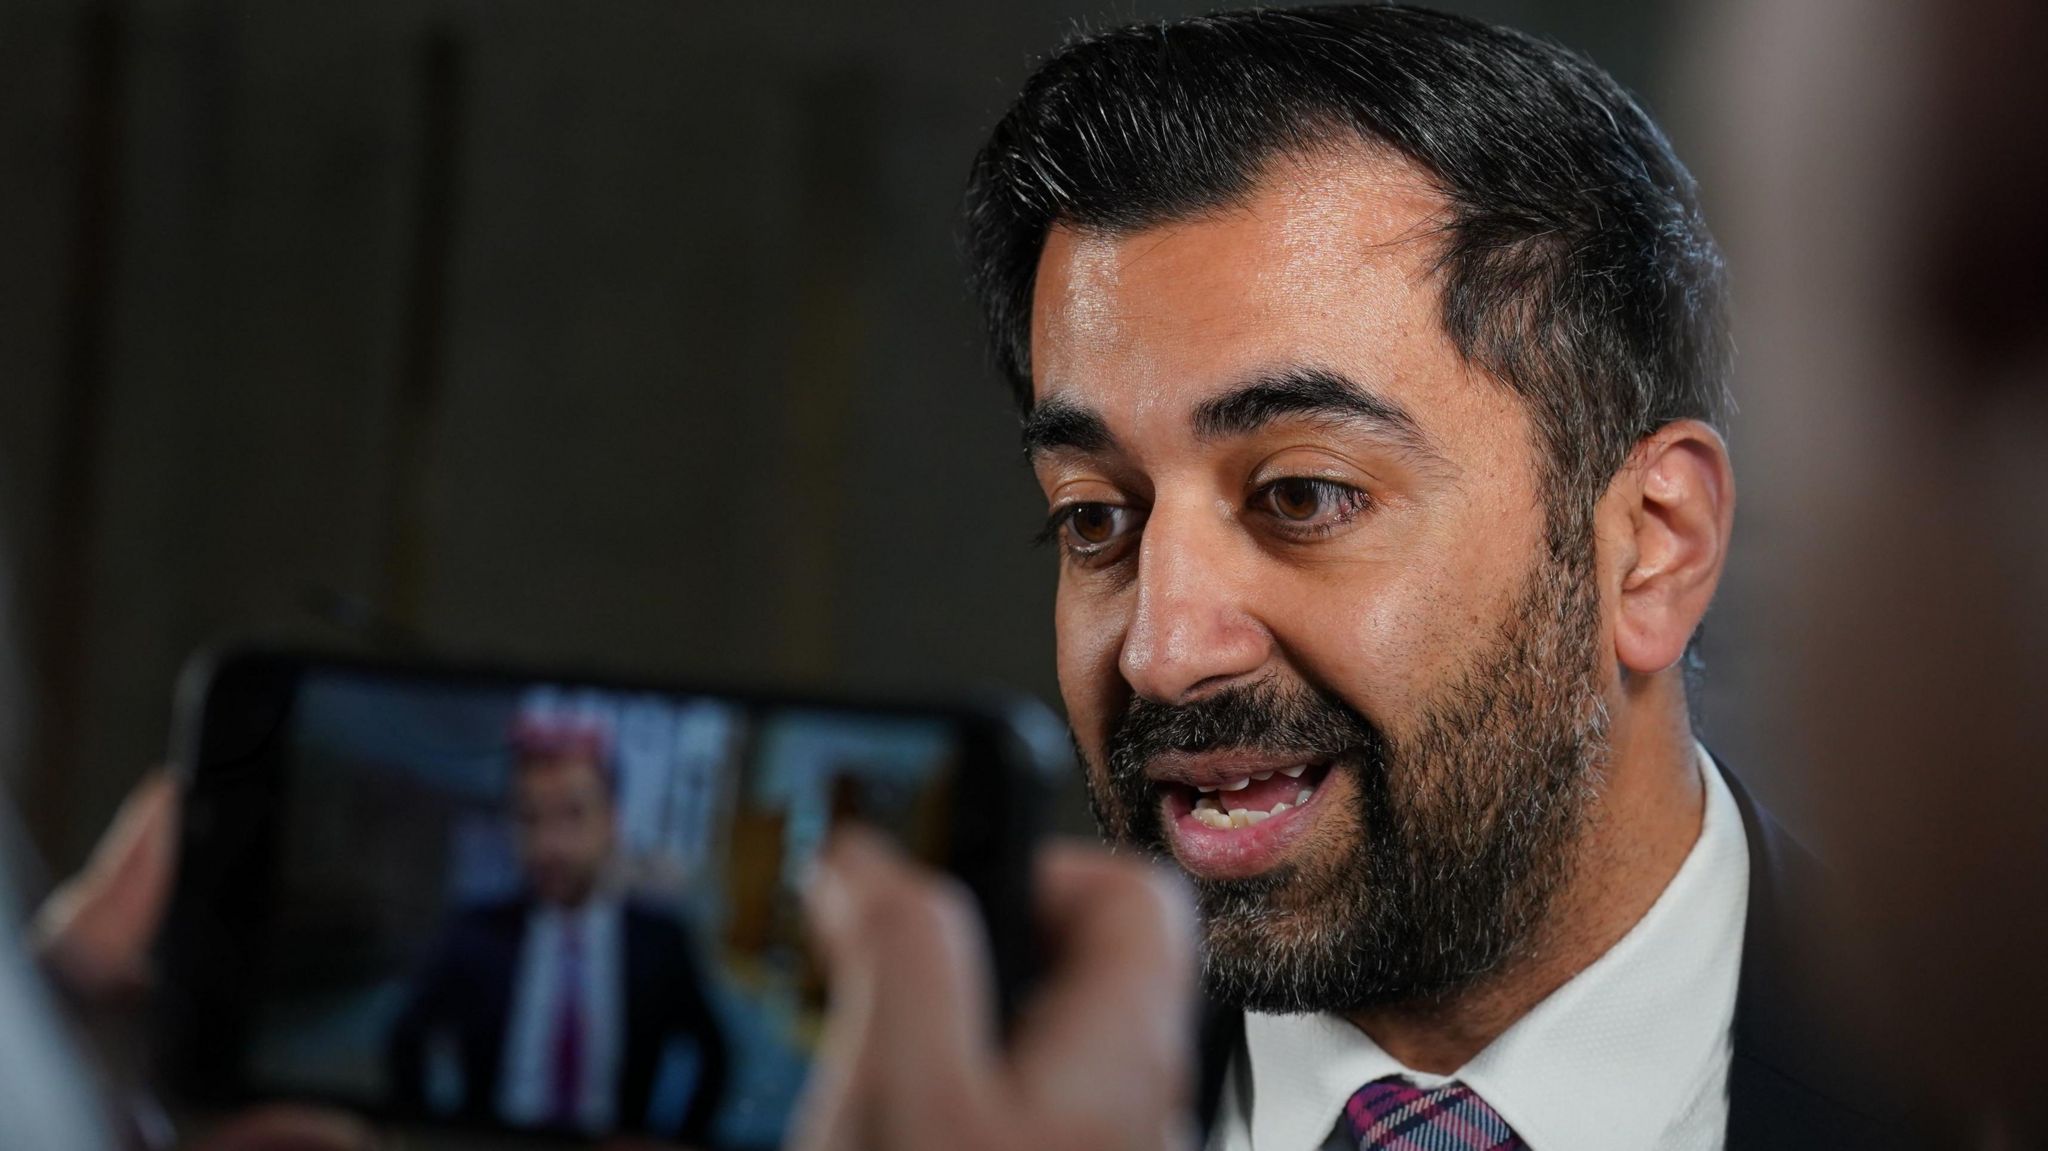 Humza Yousaf faces journalists in Holyrood